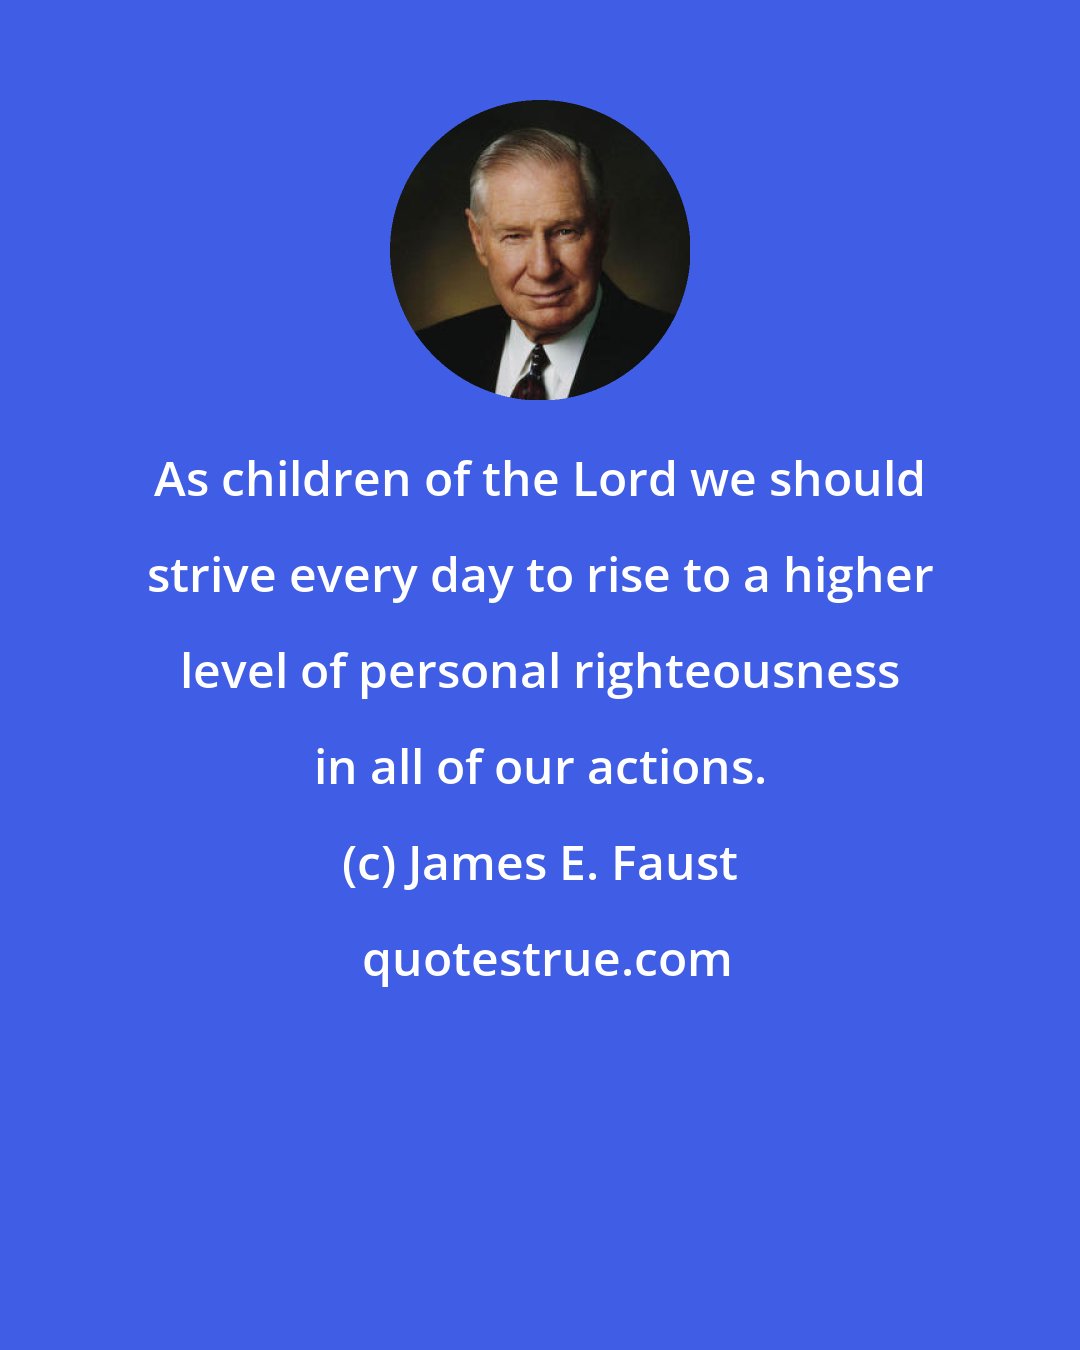 James E. Faust: As children of the Lord we should strive every day to rise to a higher level of personal righteousness in all of our actions.